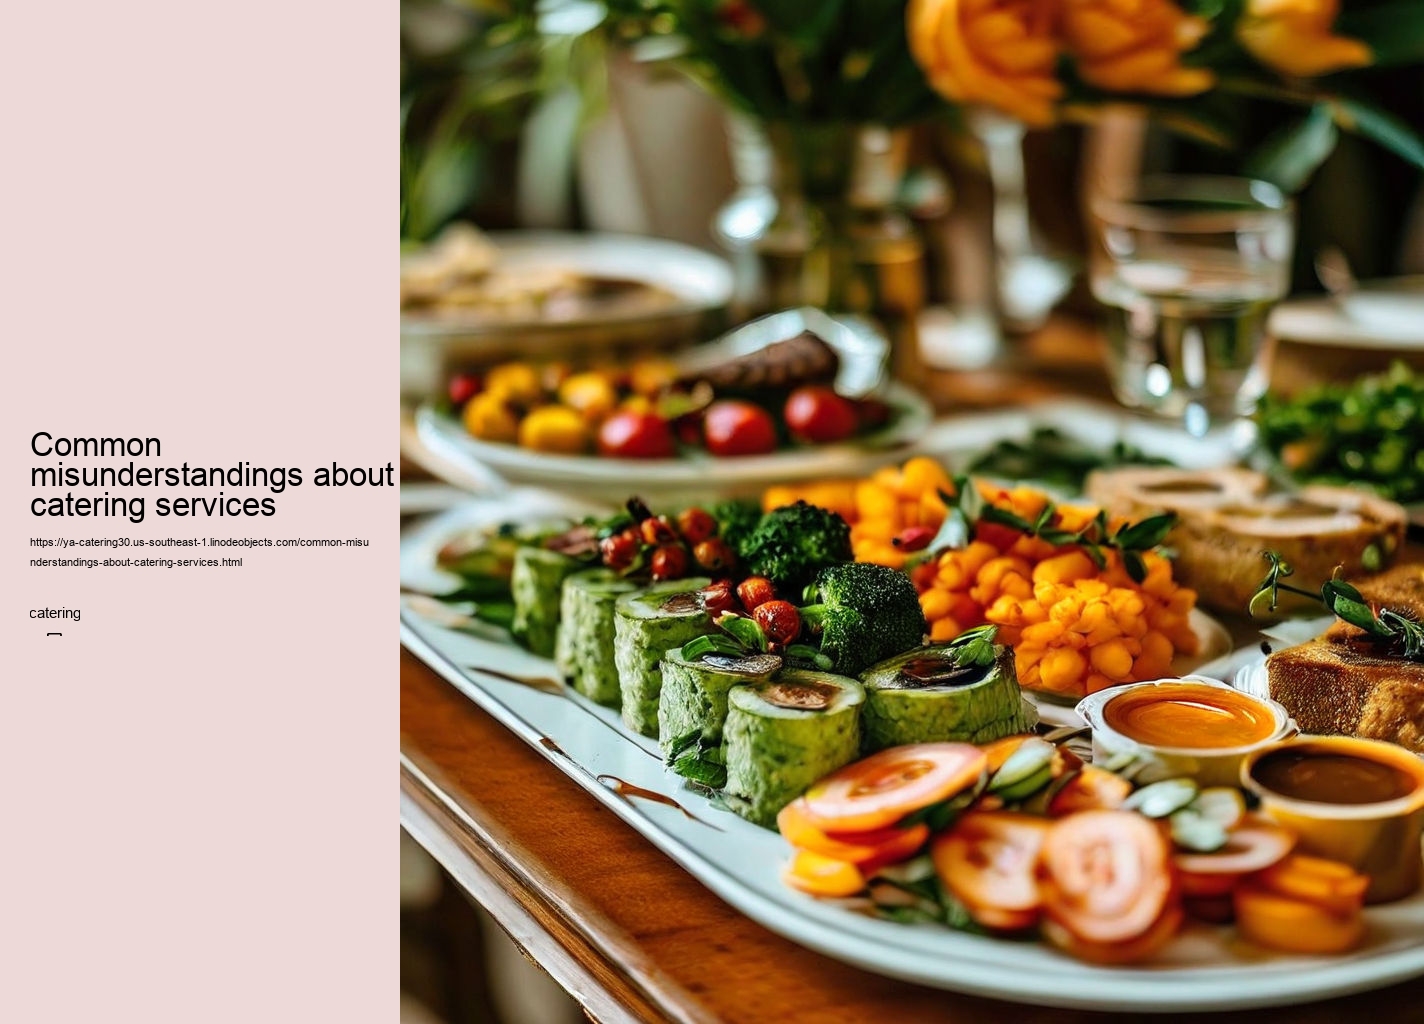 Common misunderstandings about catering services